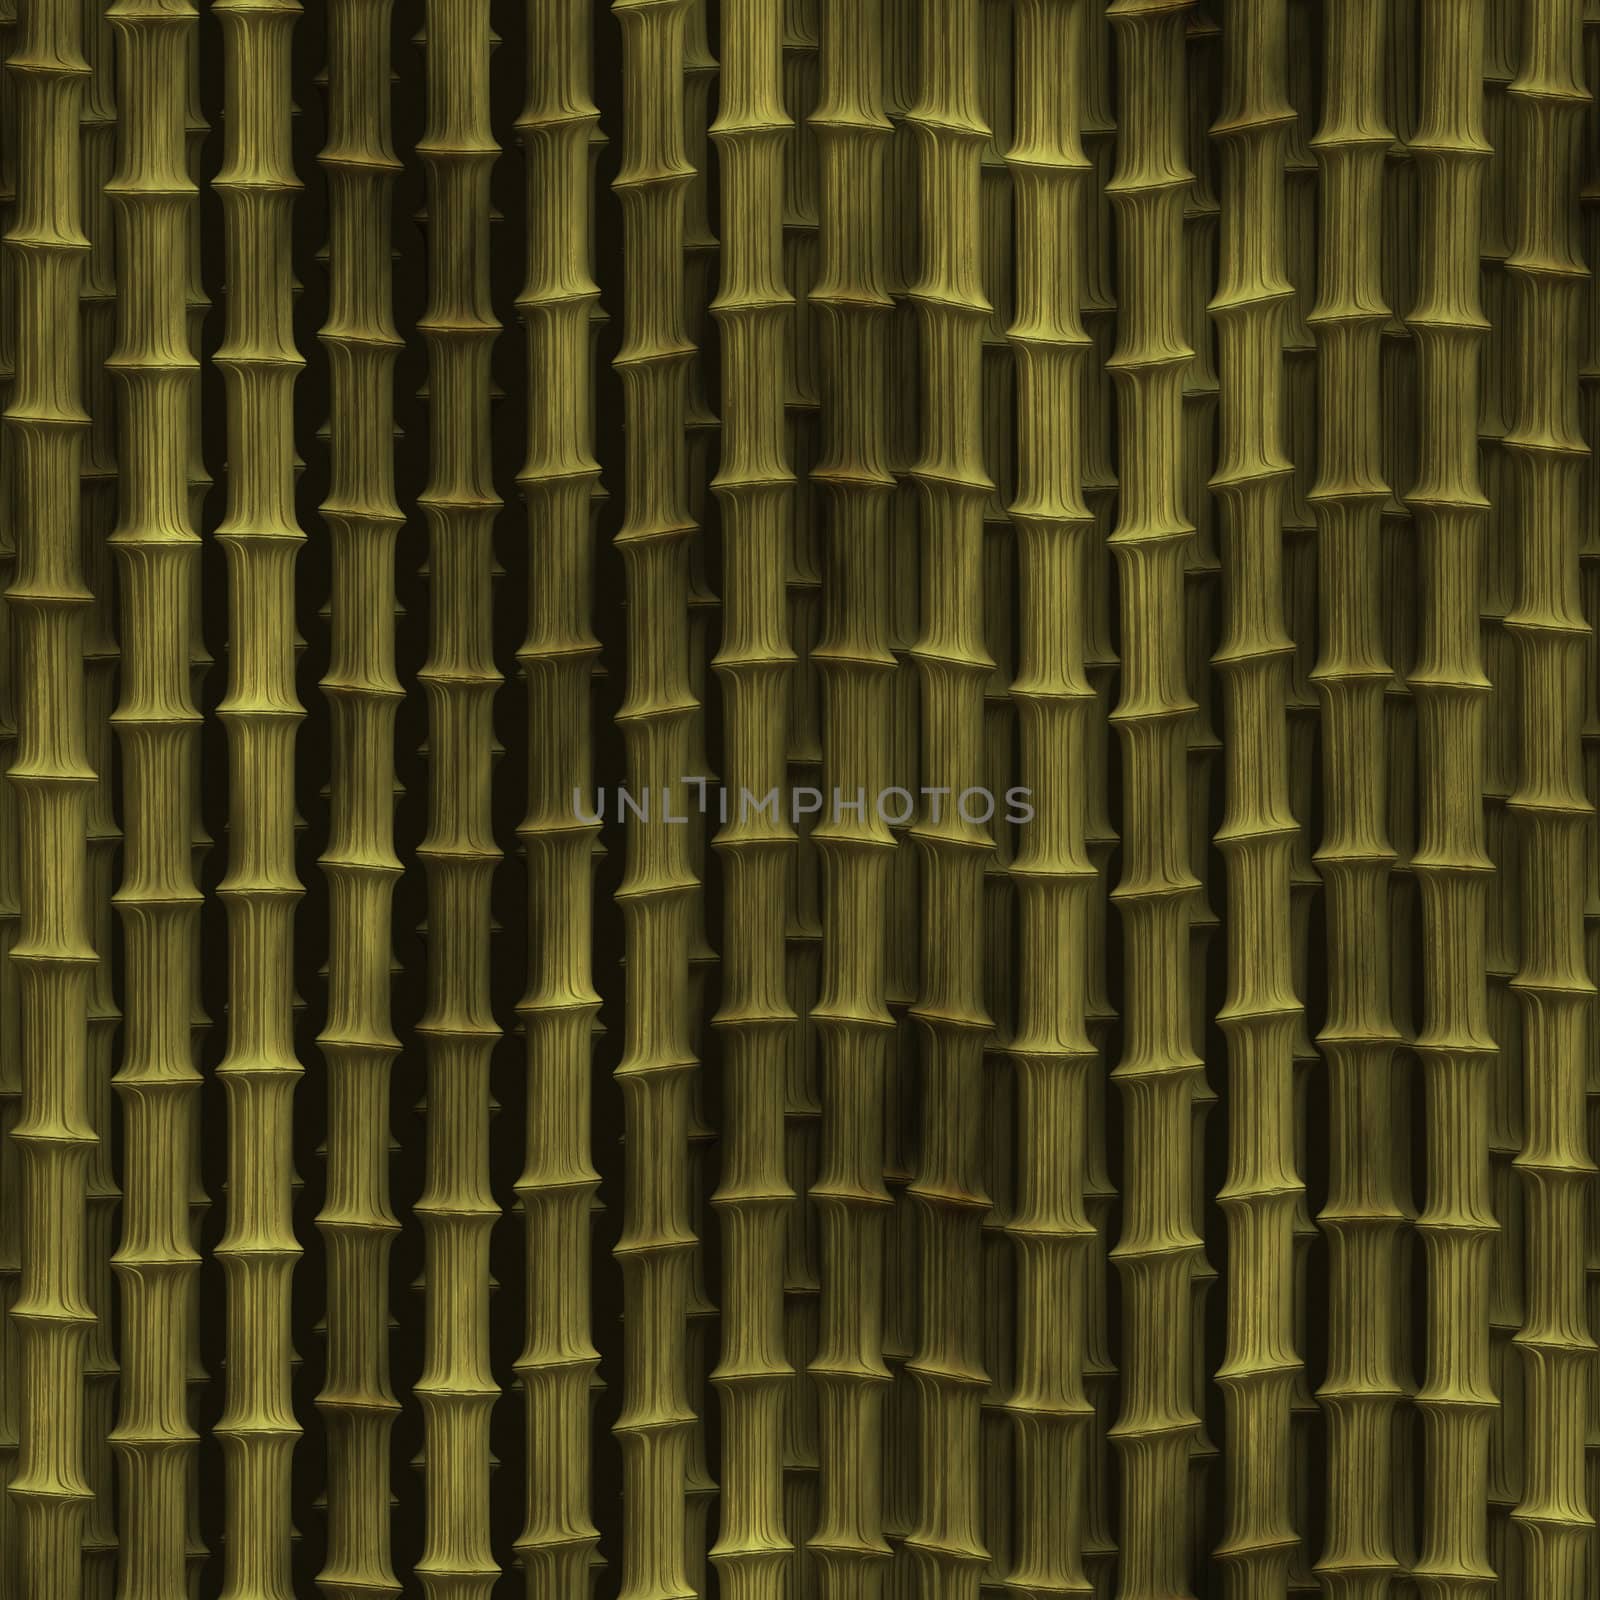 illustration showing a bamboo background seamless pattern